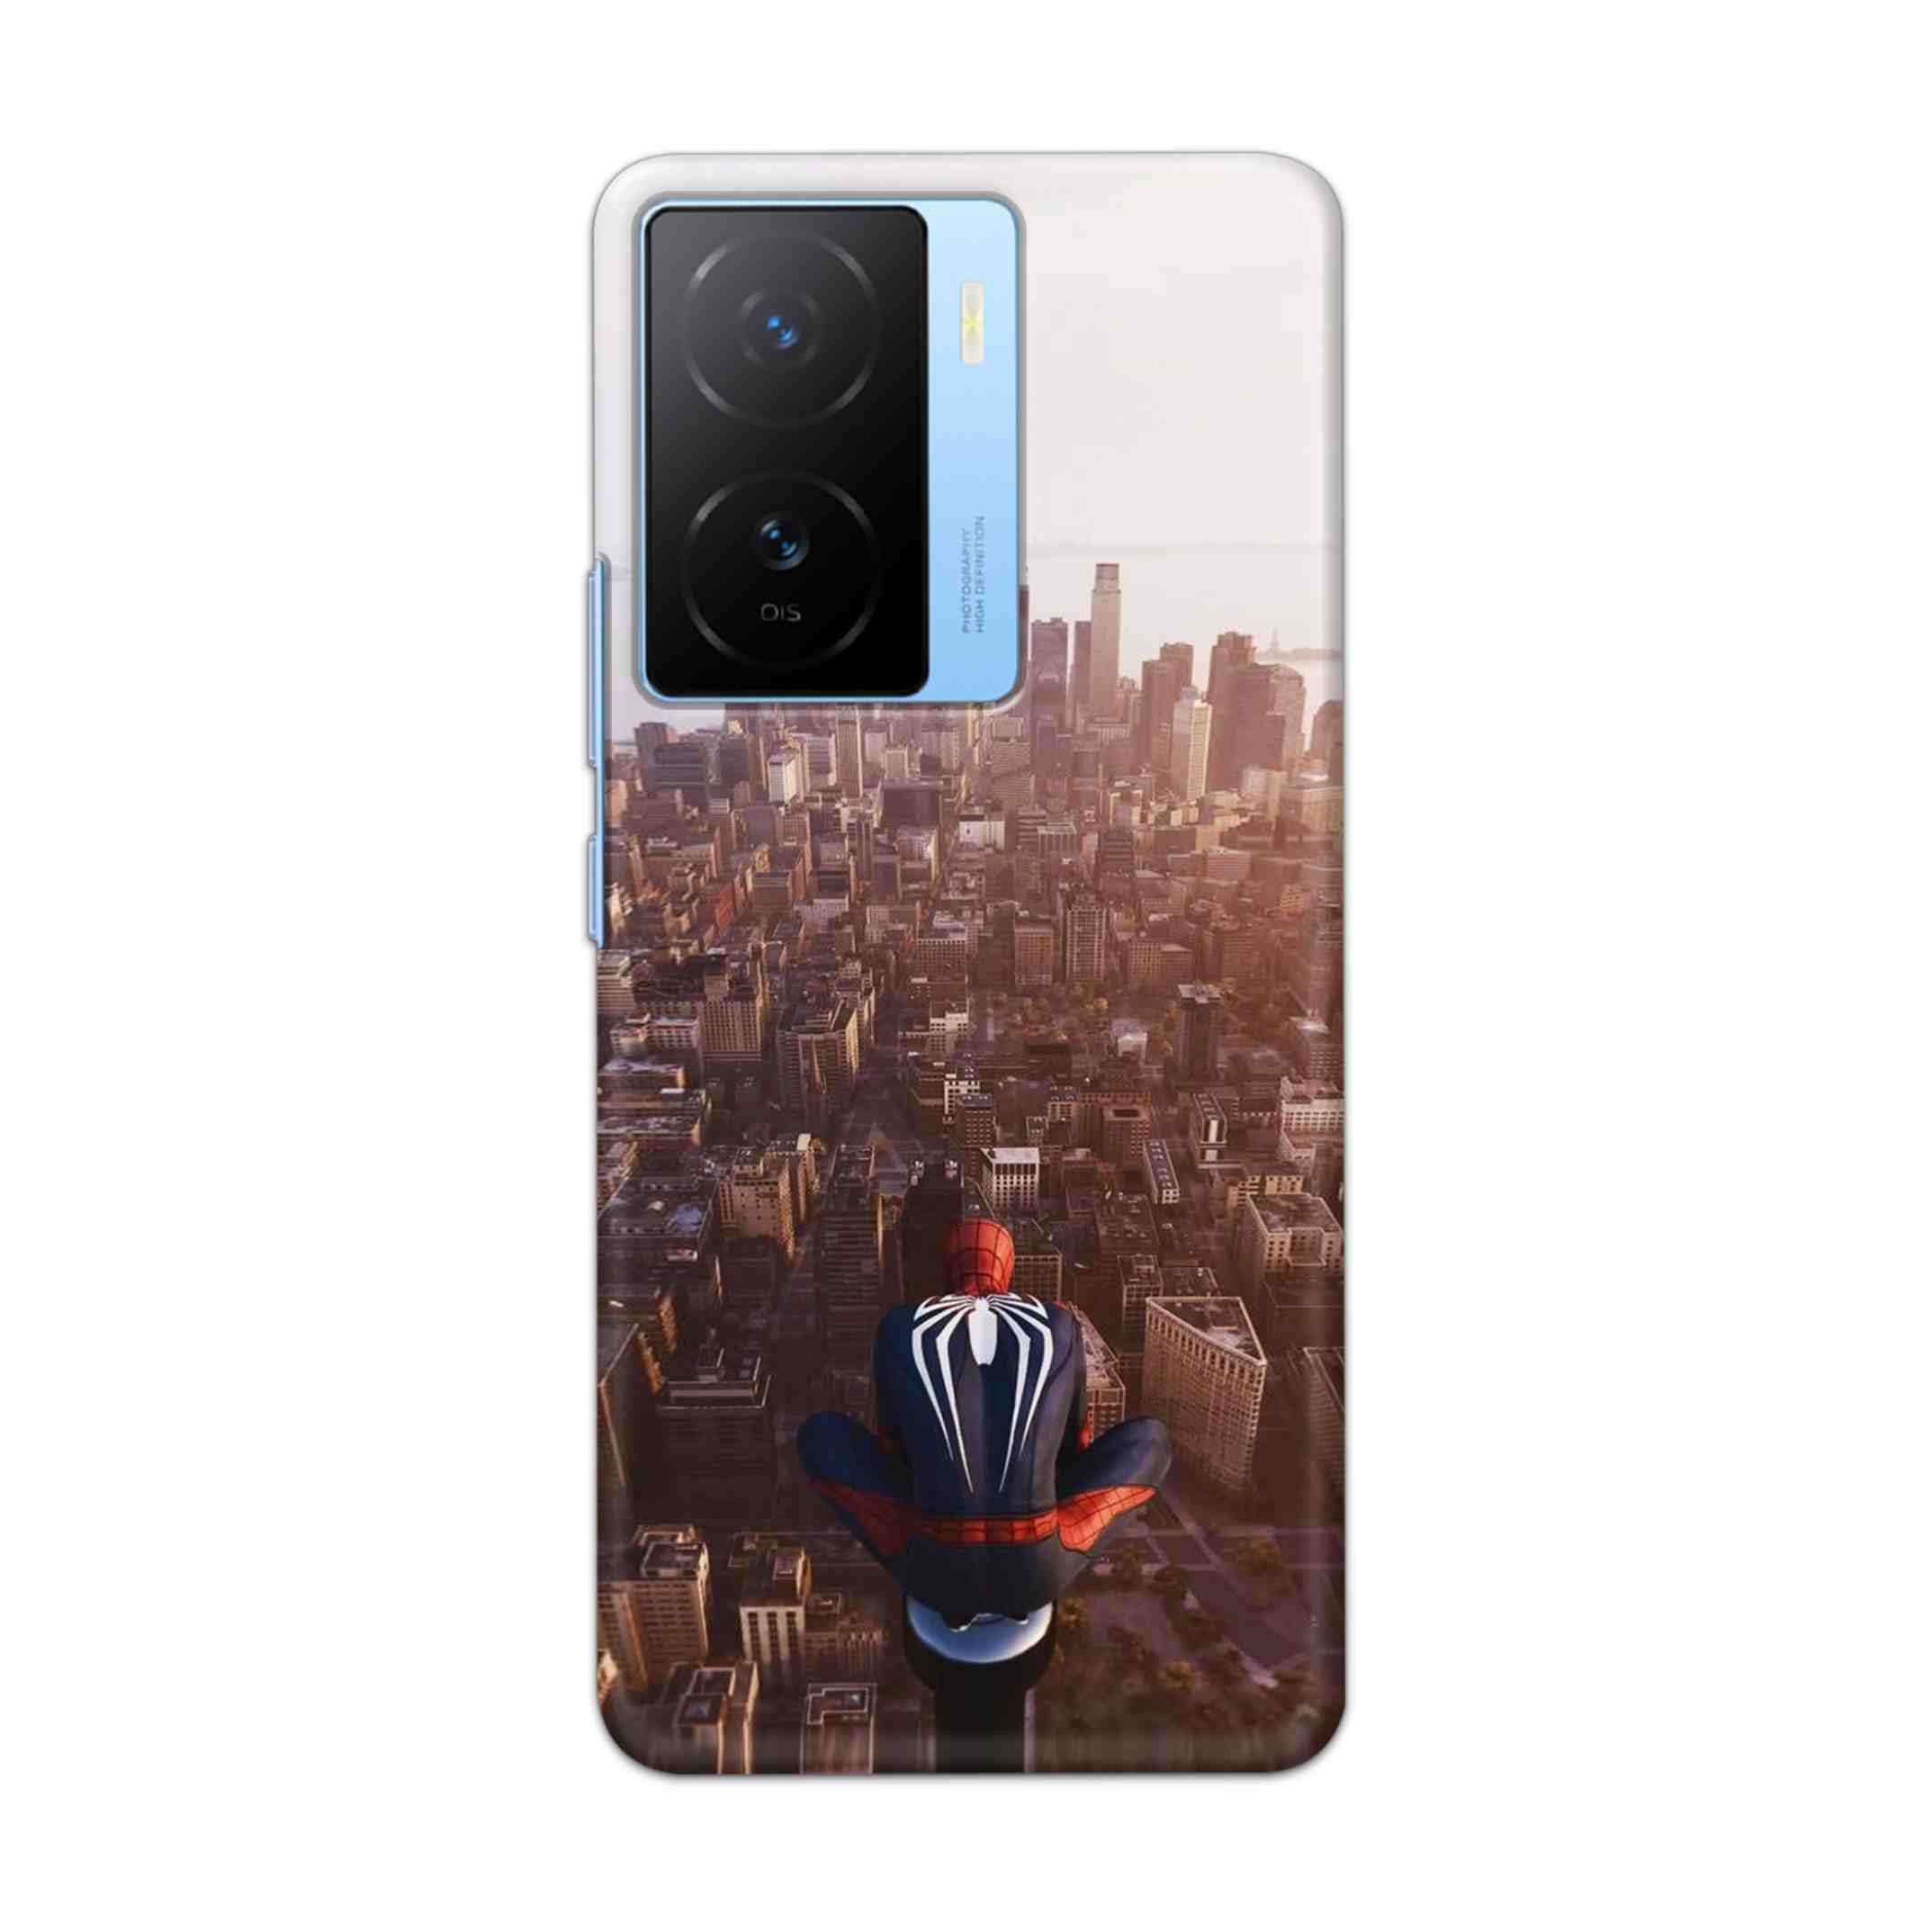 Buy City Of Spiderman Hard Back Mobile Phone Case/Cover For iQOO Z7s Online